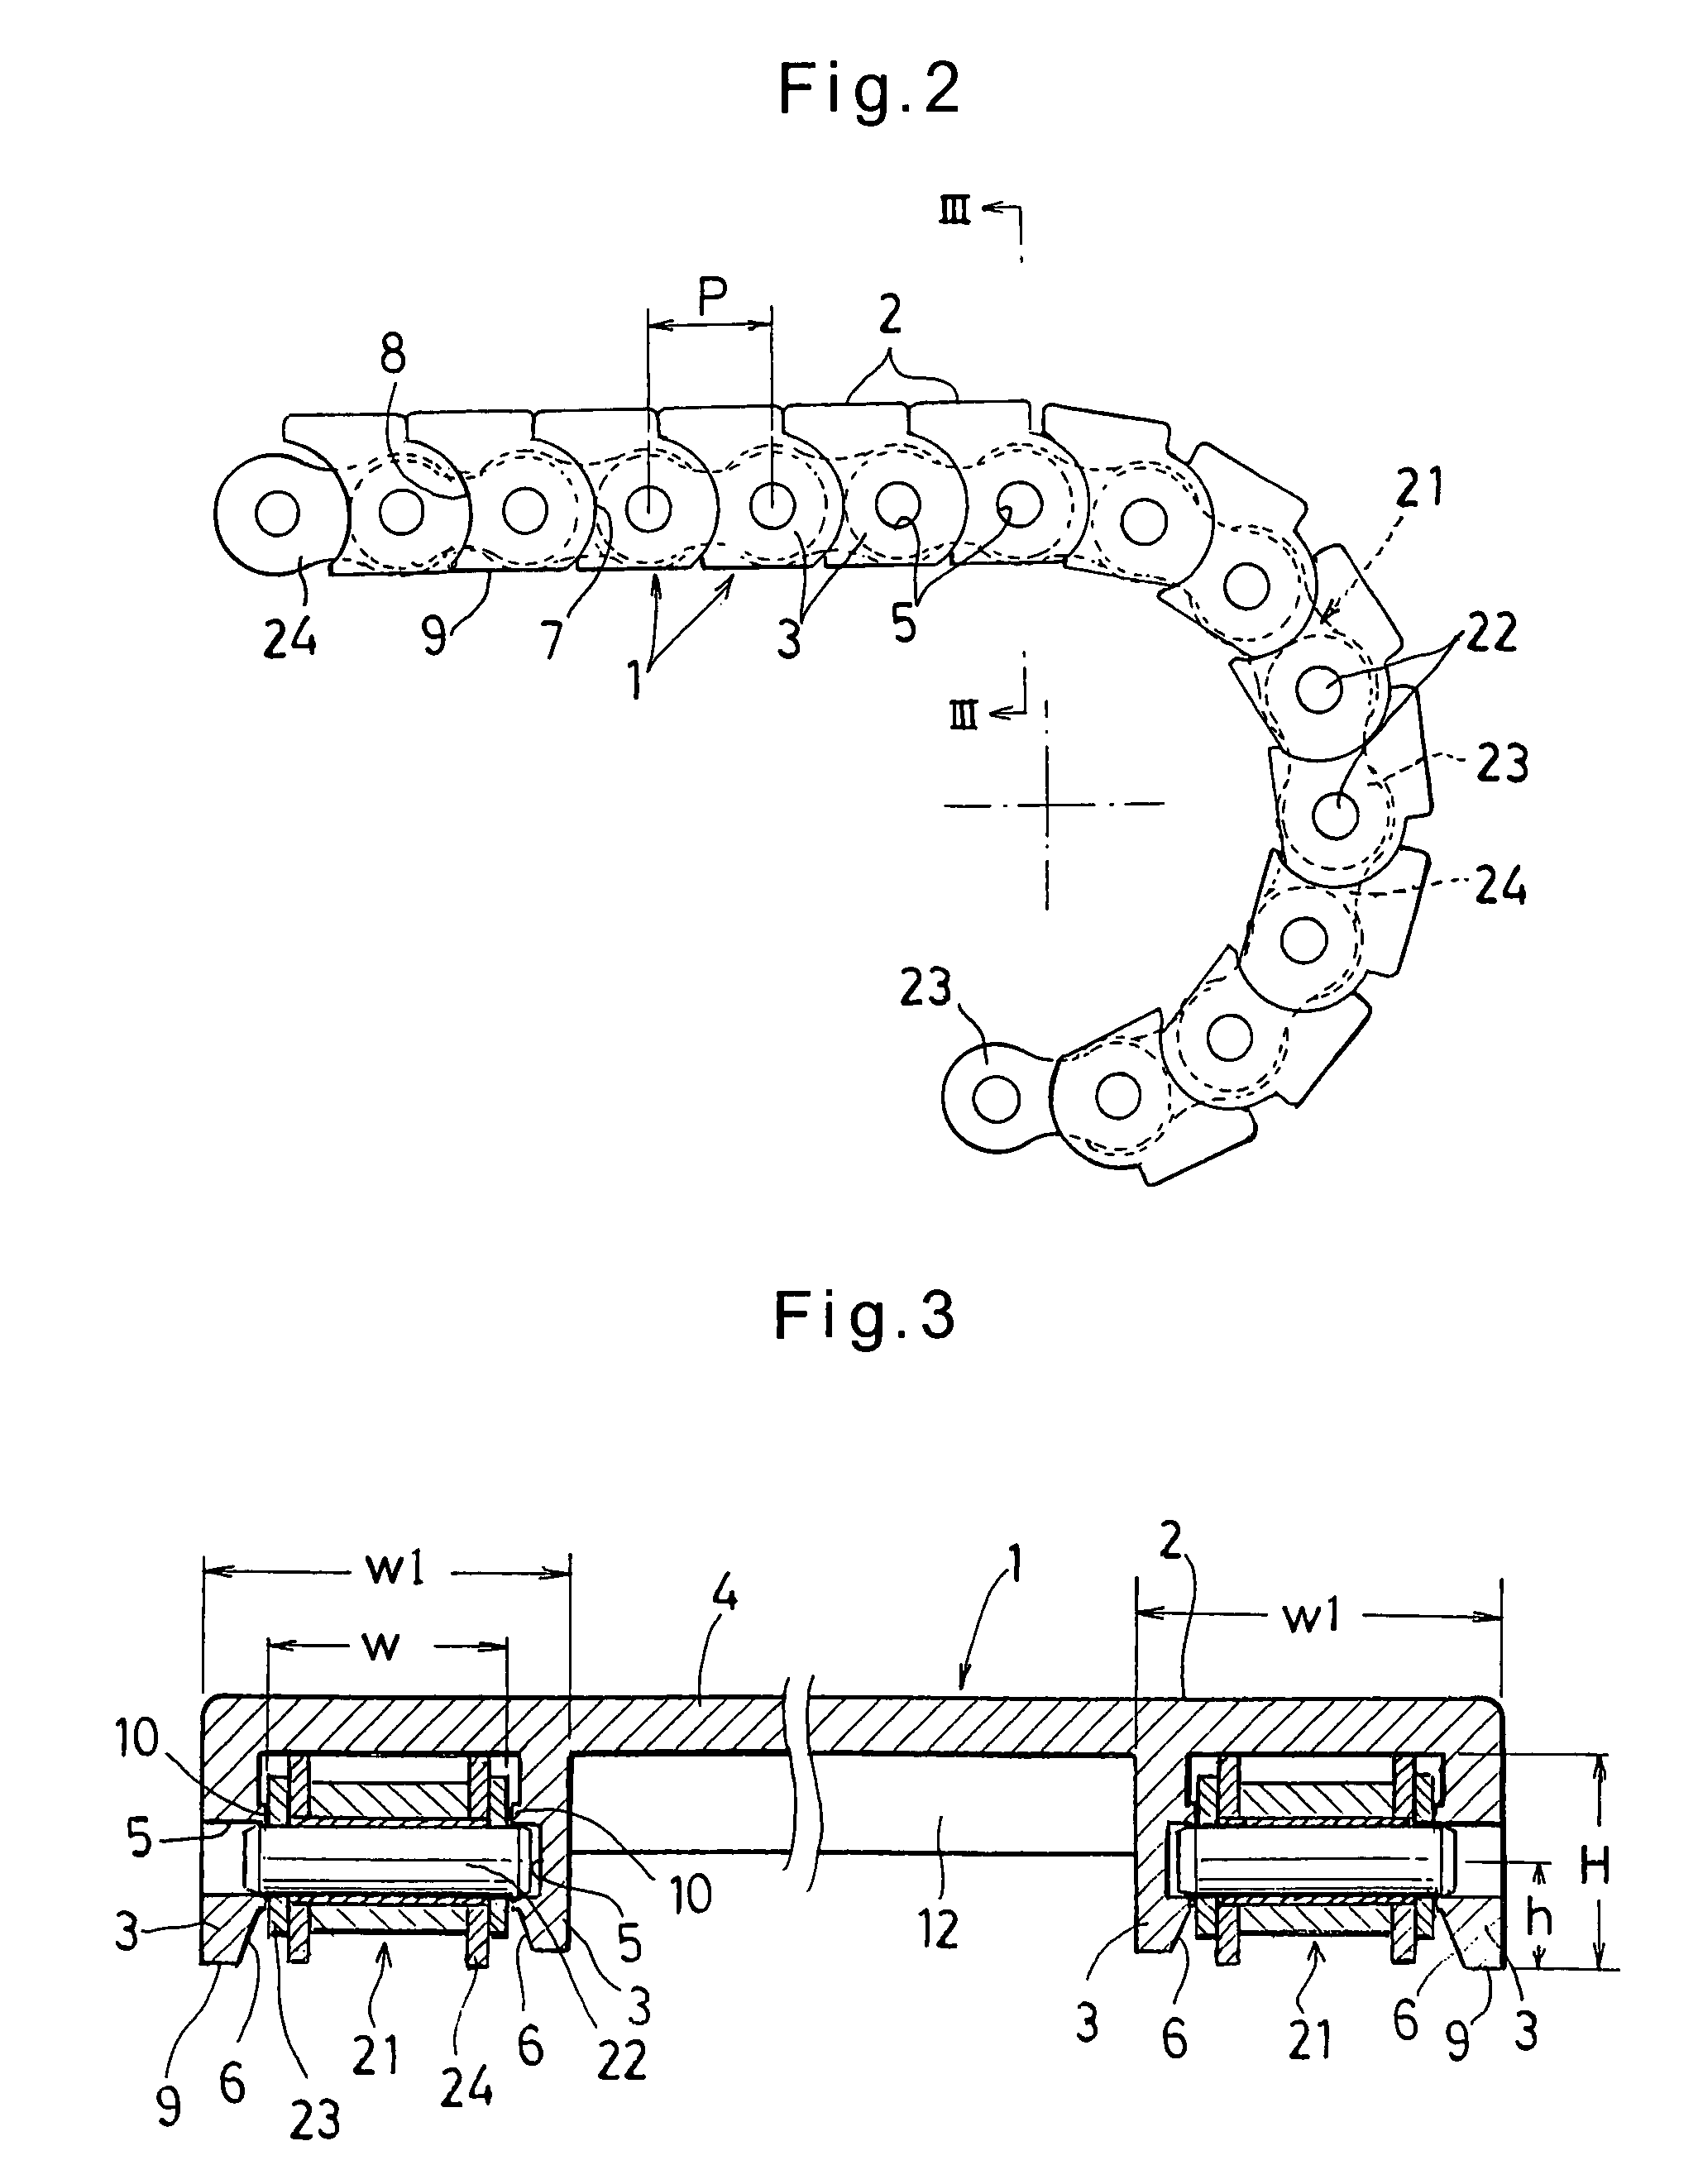 Chain cover and slat conveyor using the same